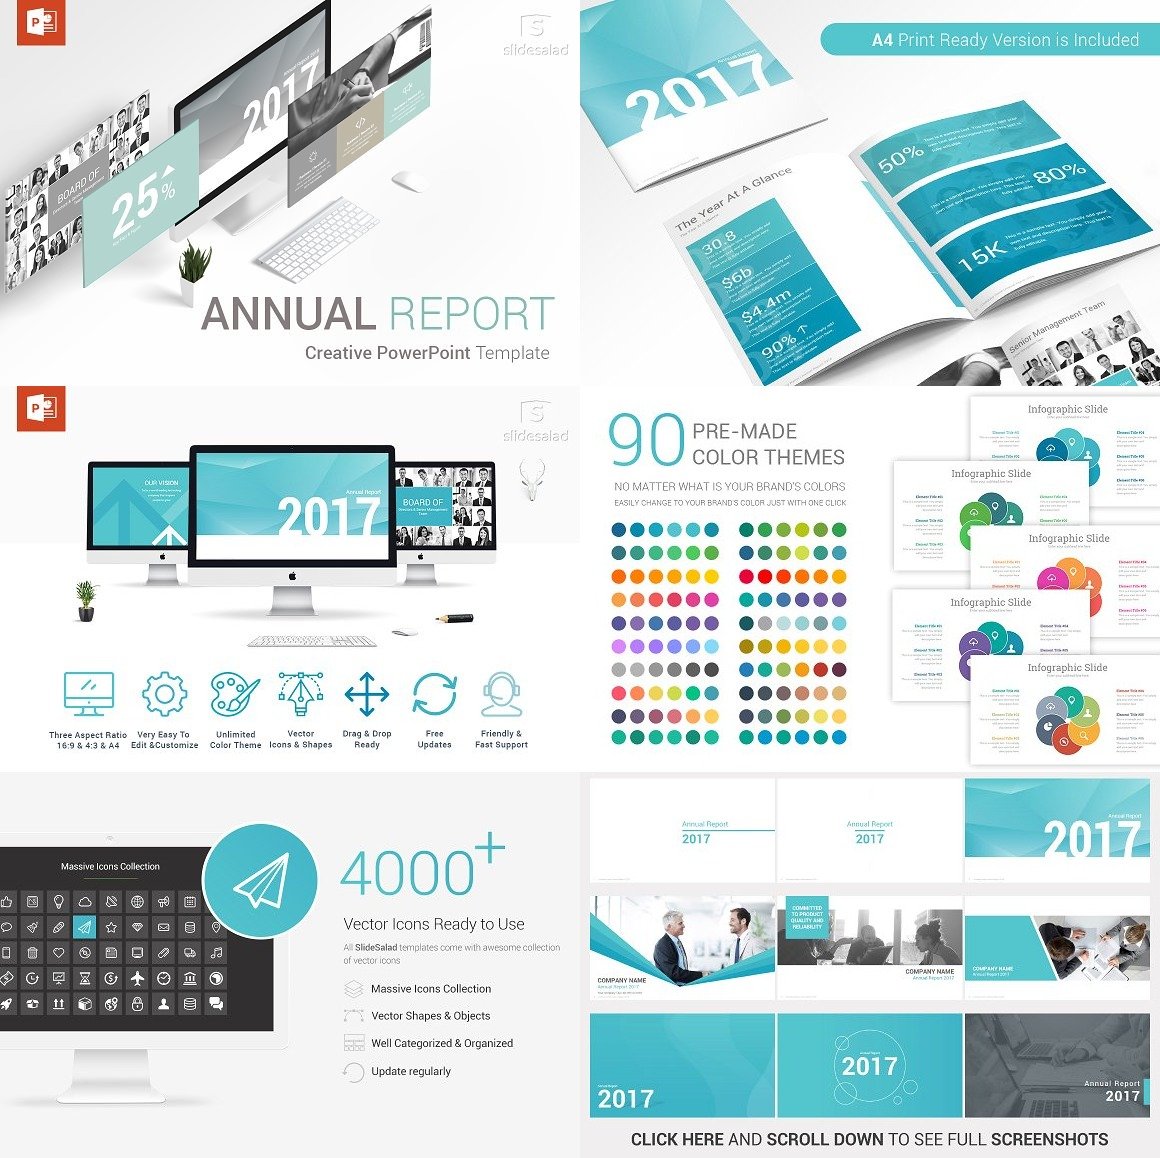 Download Annual Report PowerPoint Template 2111187 SoftArchive